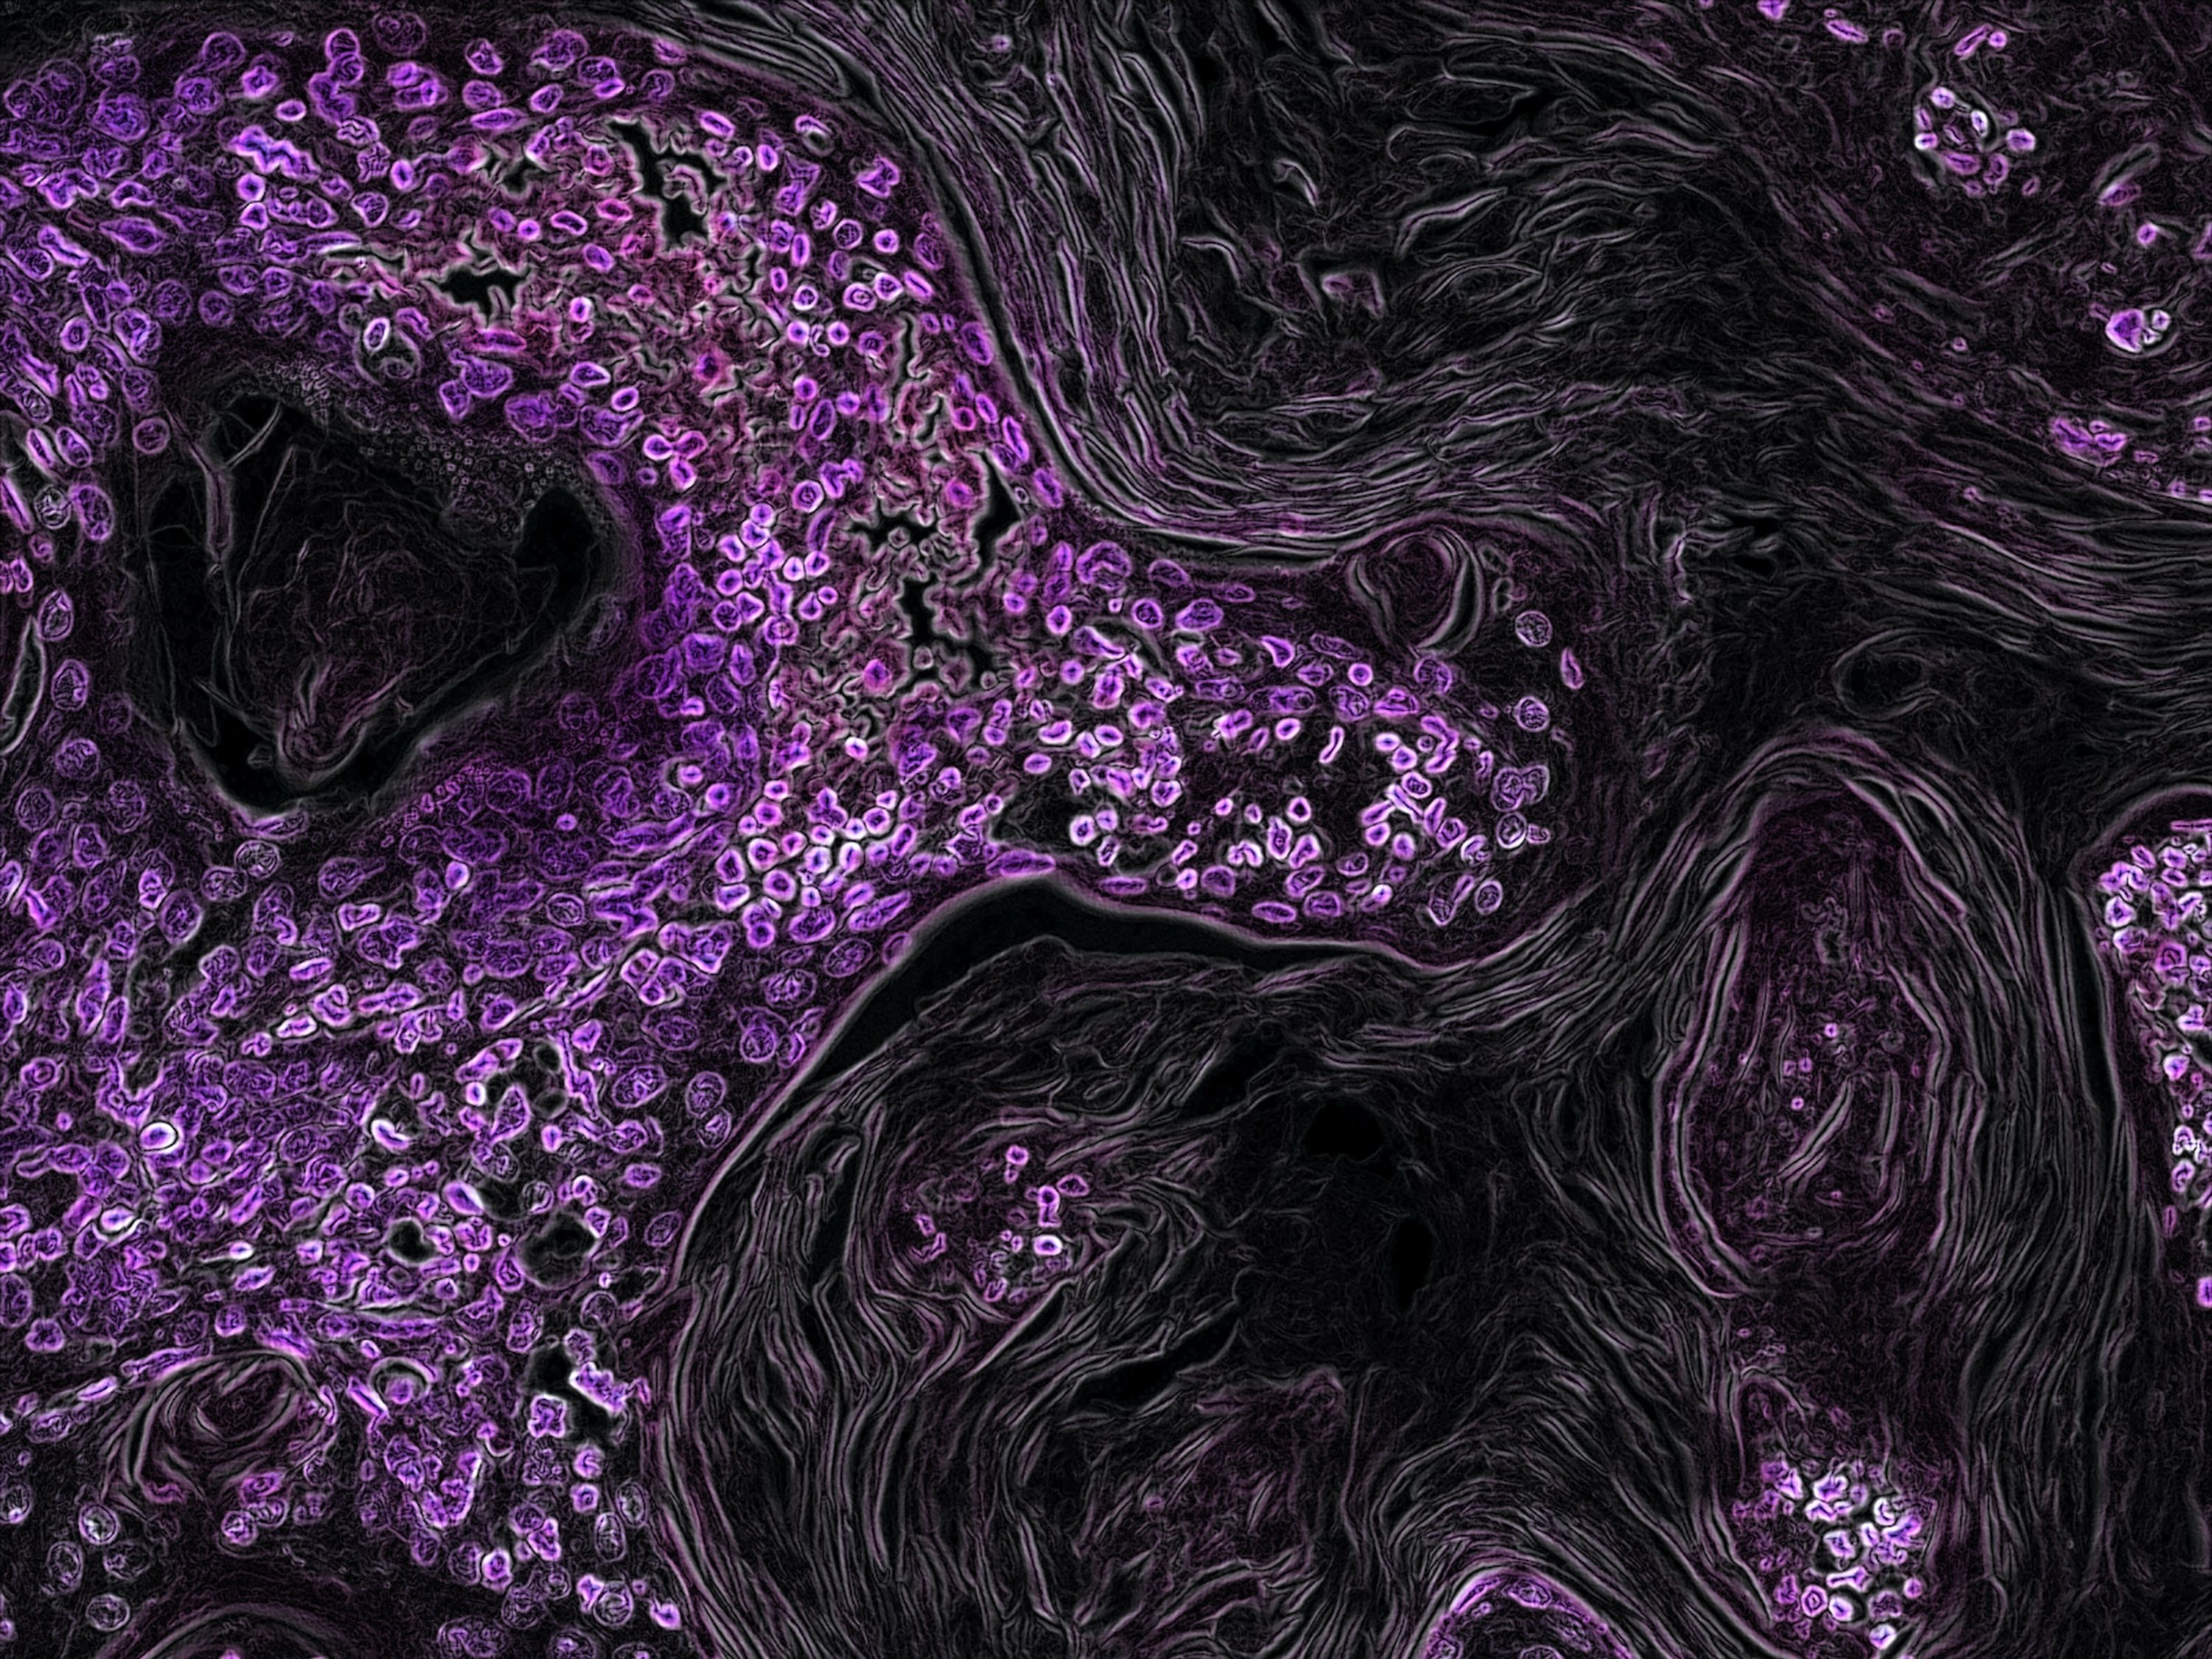 A closeup photograph of cells, dyed purple, with black swirls in between